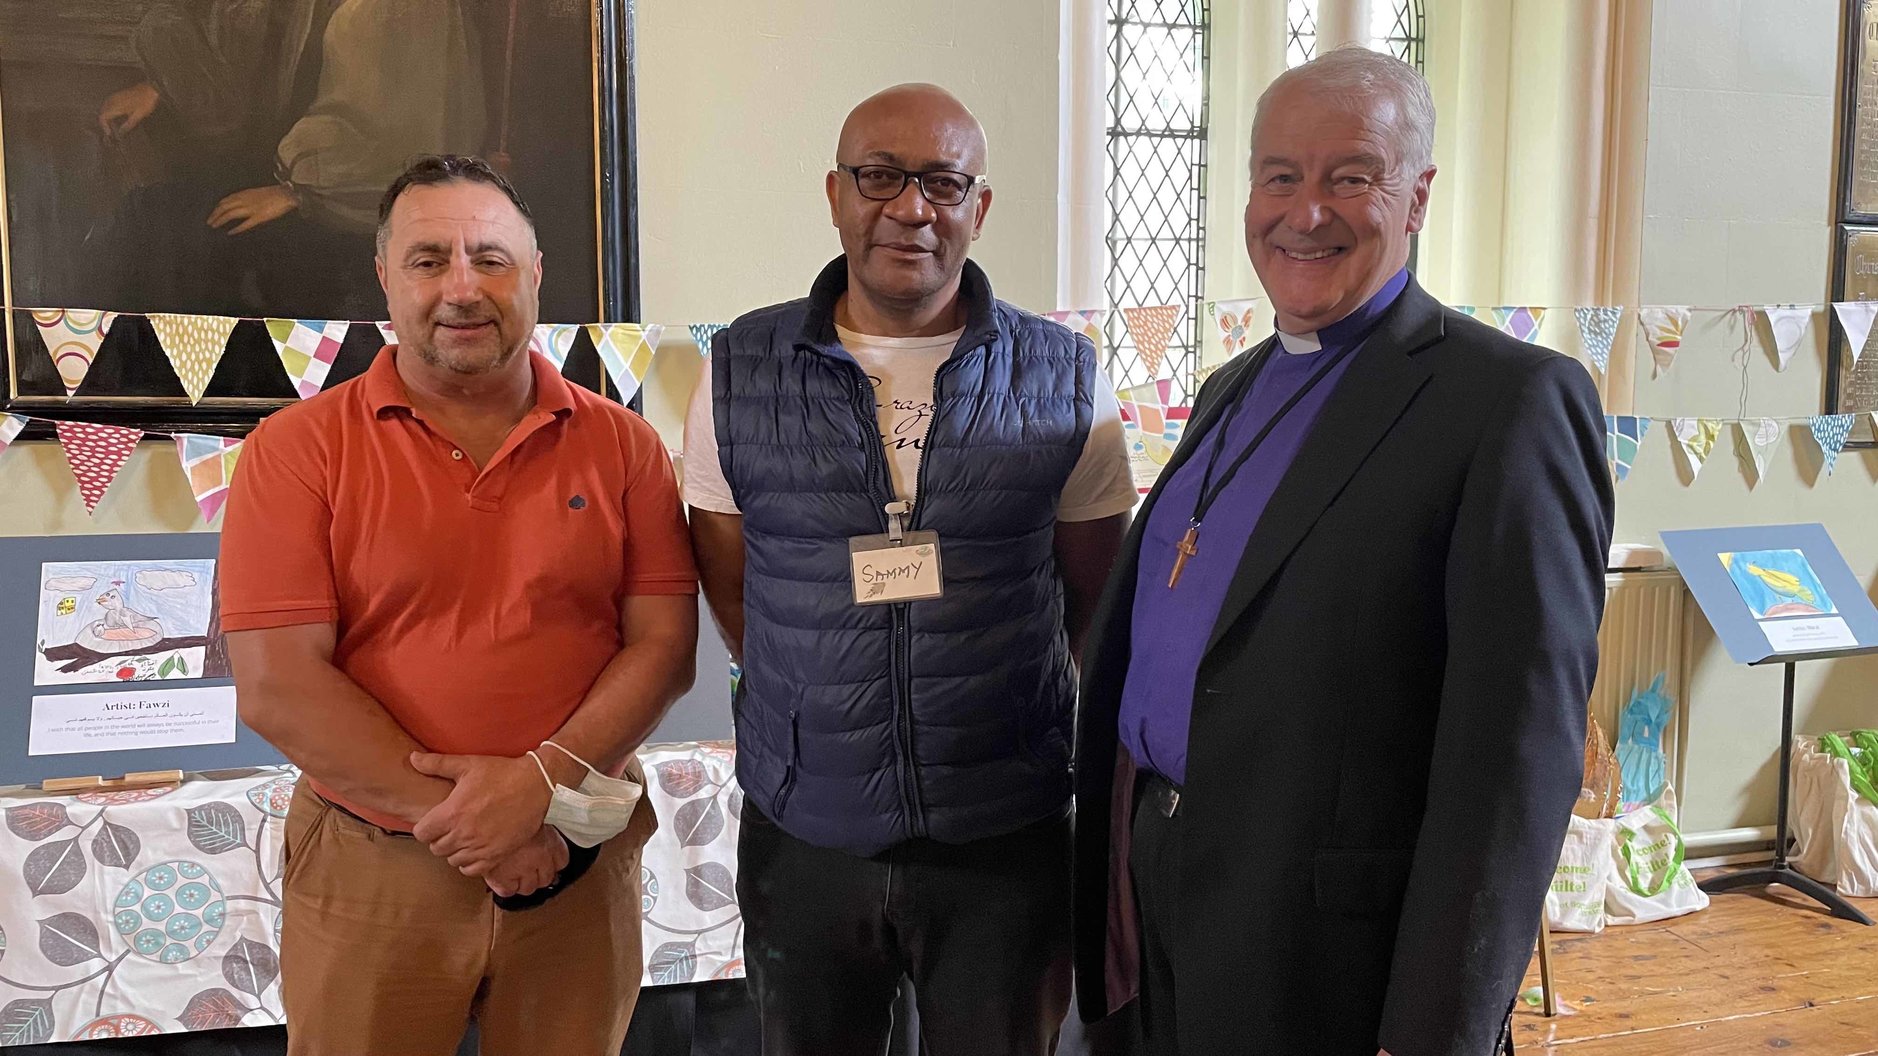 Archbishop Michael Jackson with Adrian Cristae of Dublin City Interfaith Forum and on of the camp volunteers, Sammy.